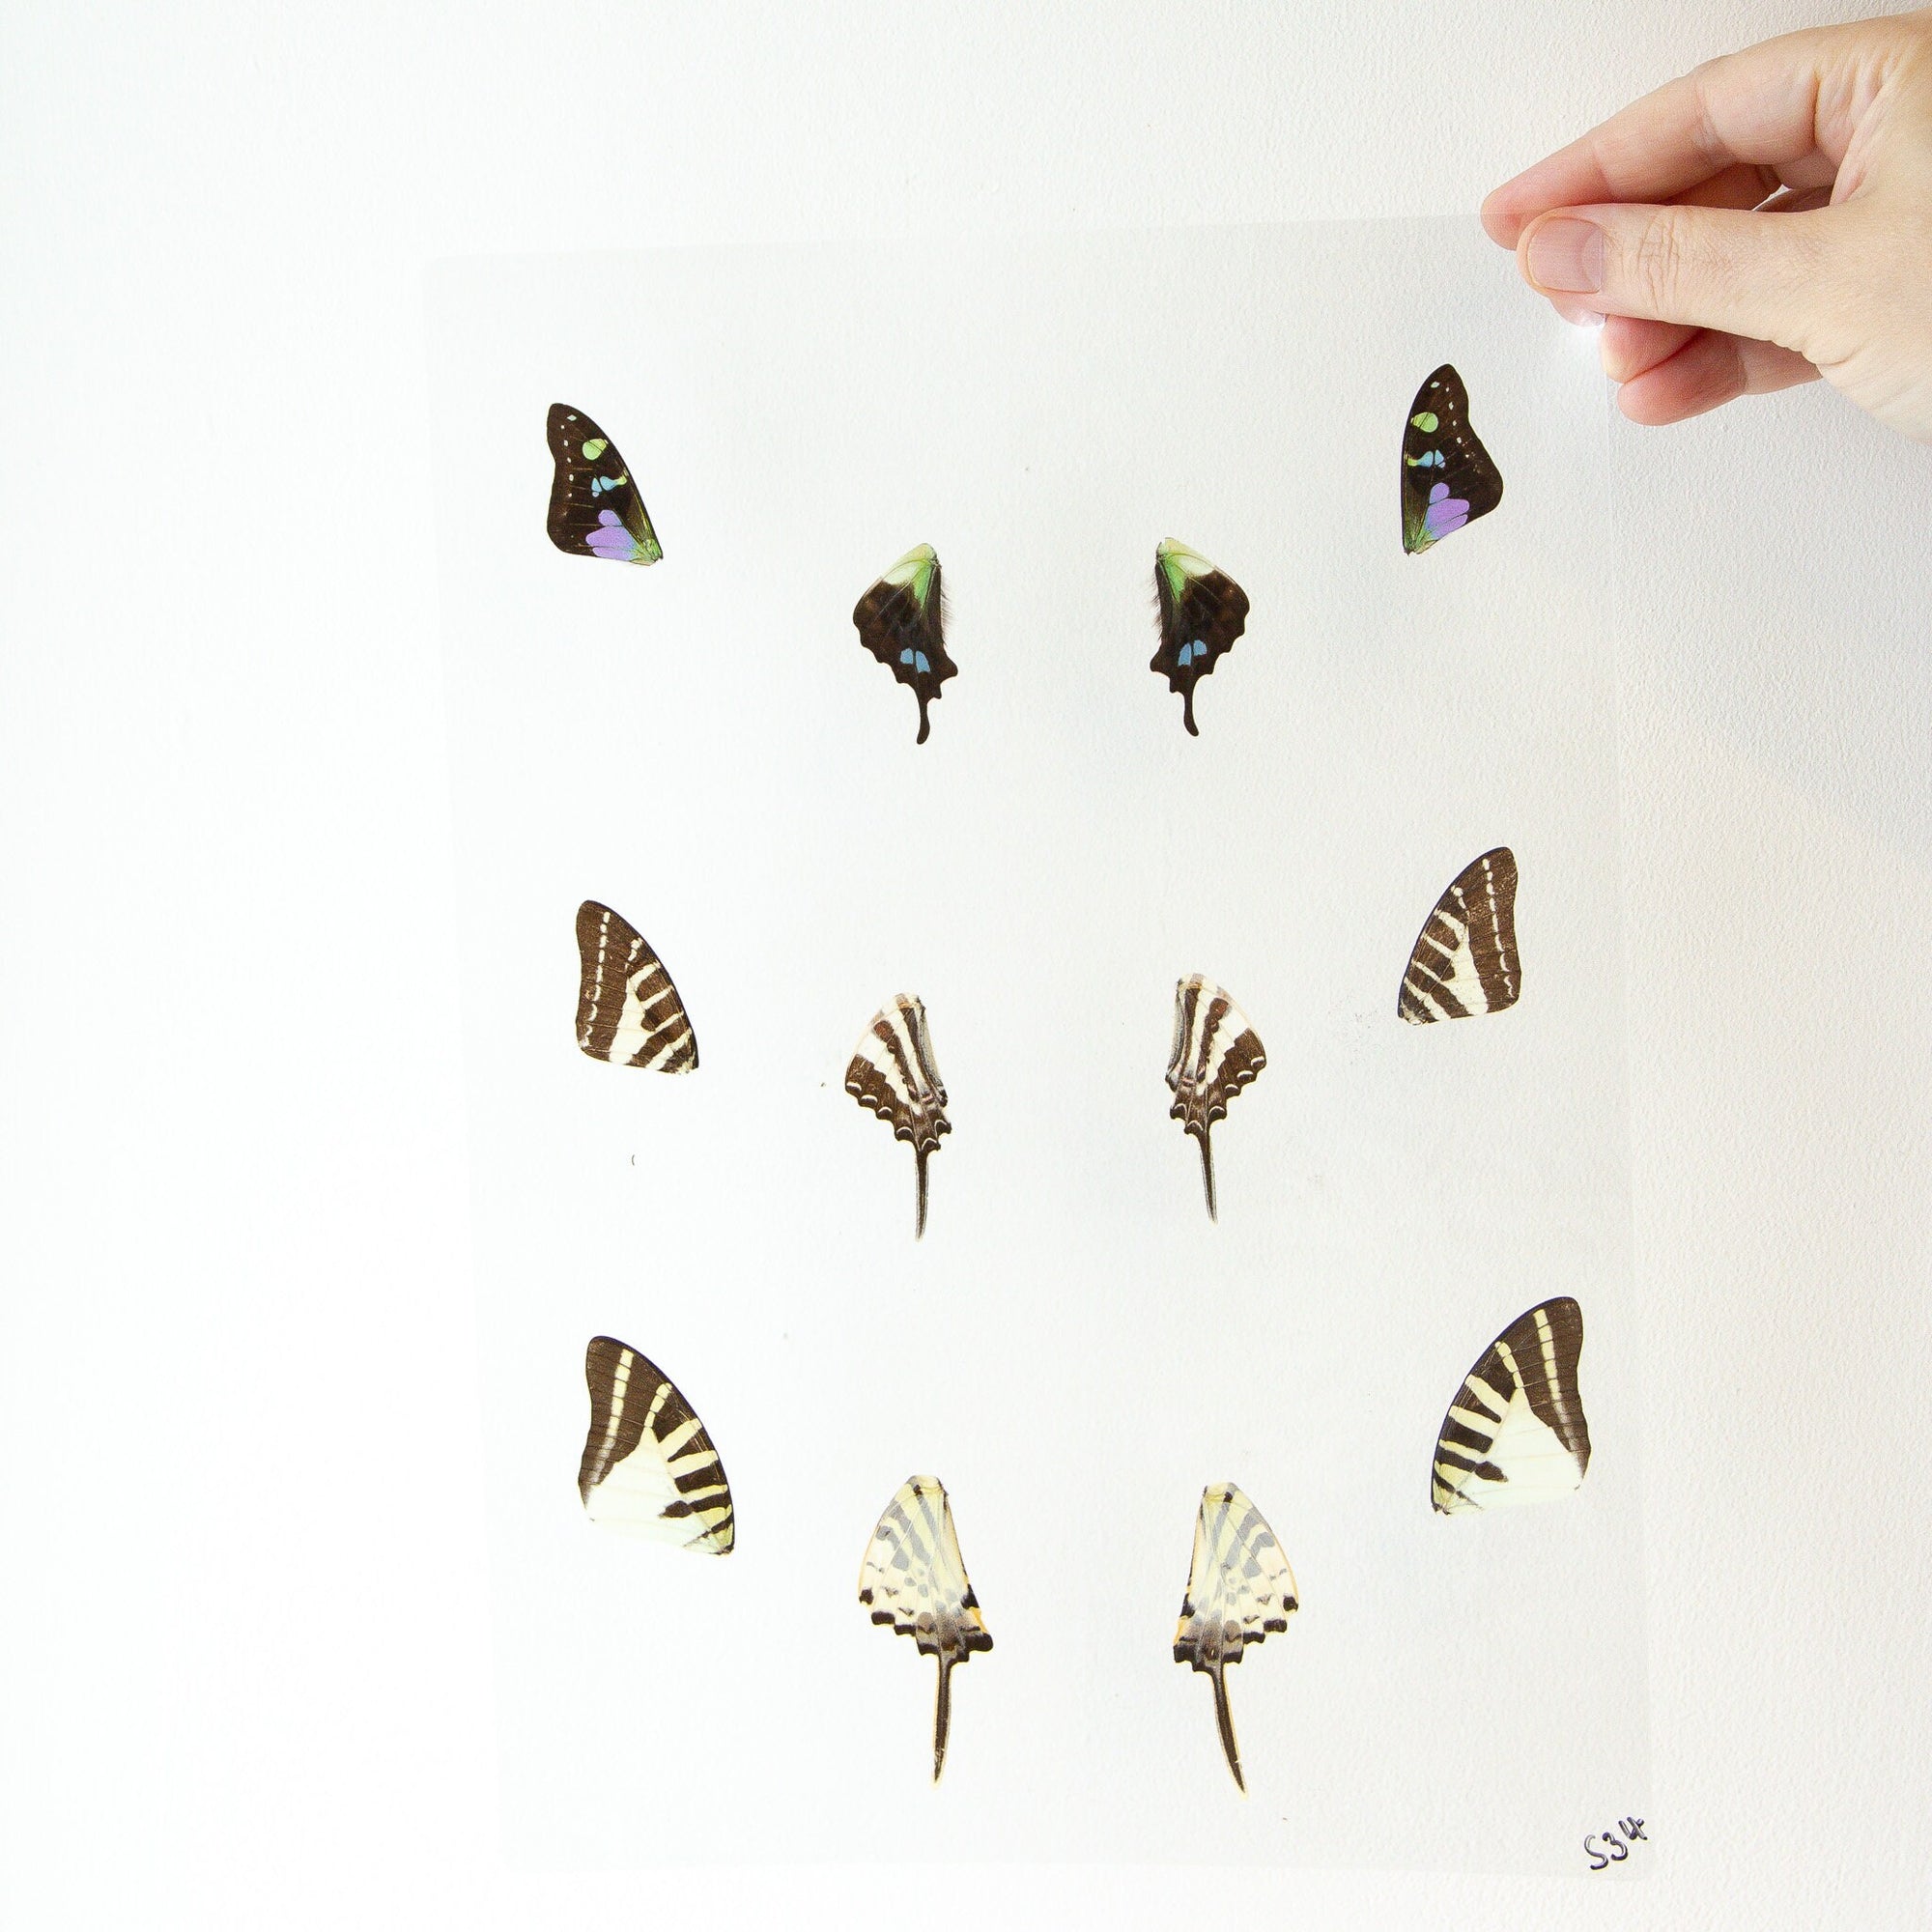 Butterfly Wings GLOSSY LAMINATED SHEET Real Ethically Sourced Specimens Moths Butterflies Wings for Art -- S34